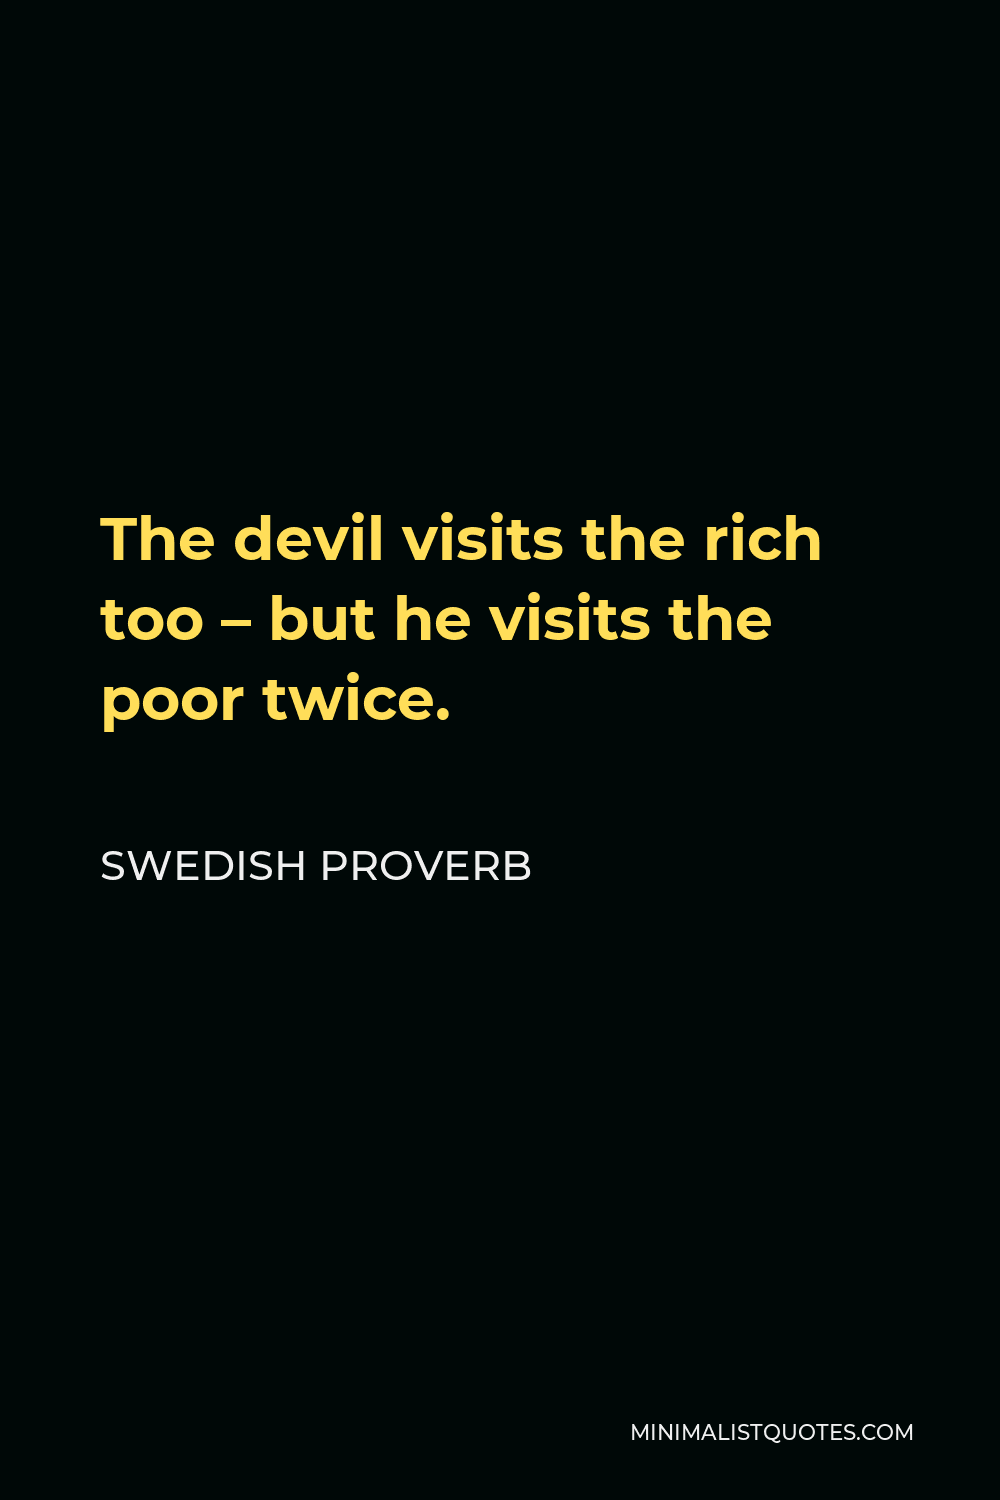 Swedish Proverb Quote - The devil visits the rich too — but he visits the poor twice.